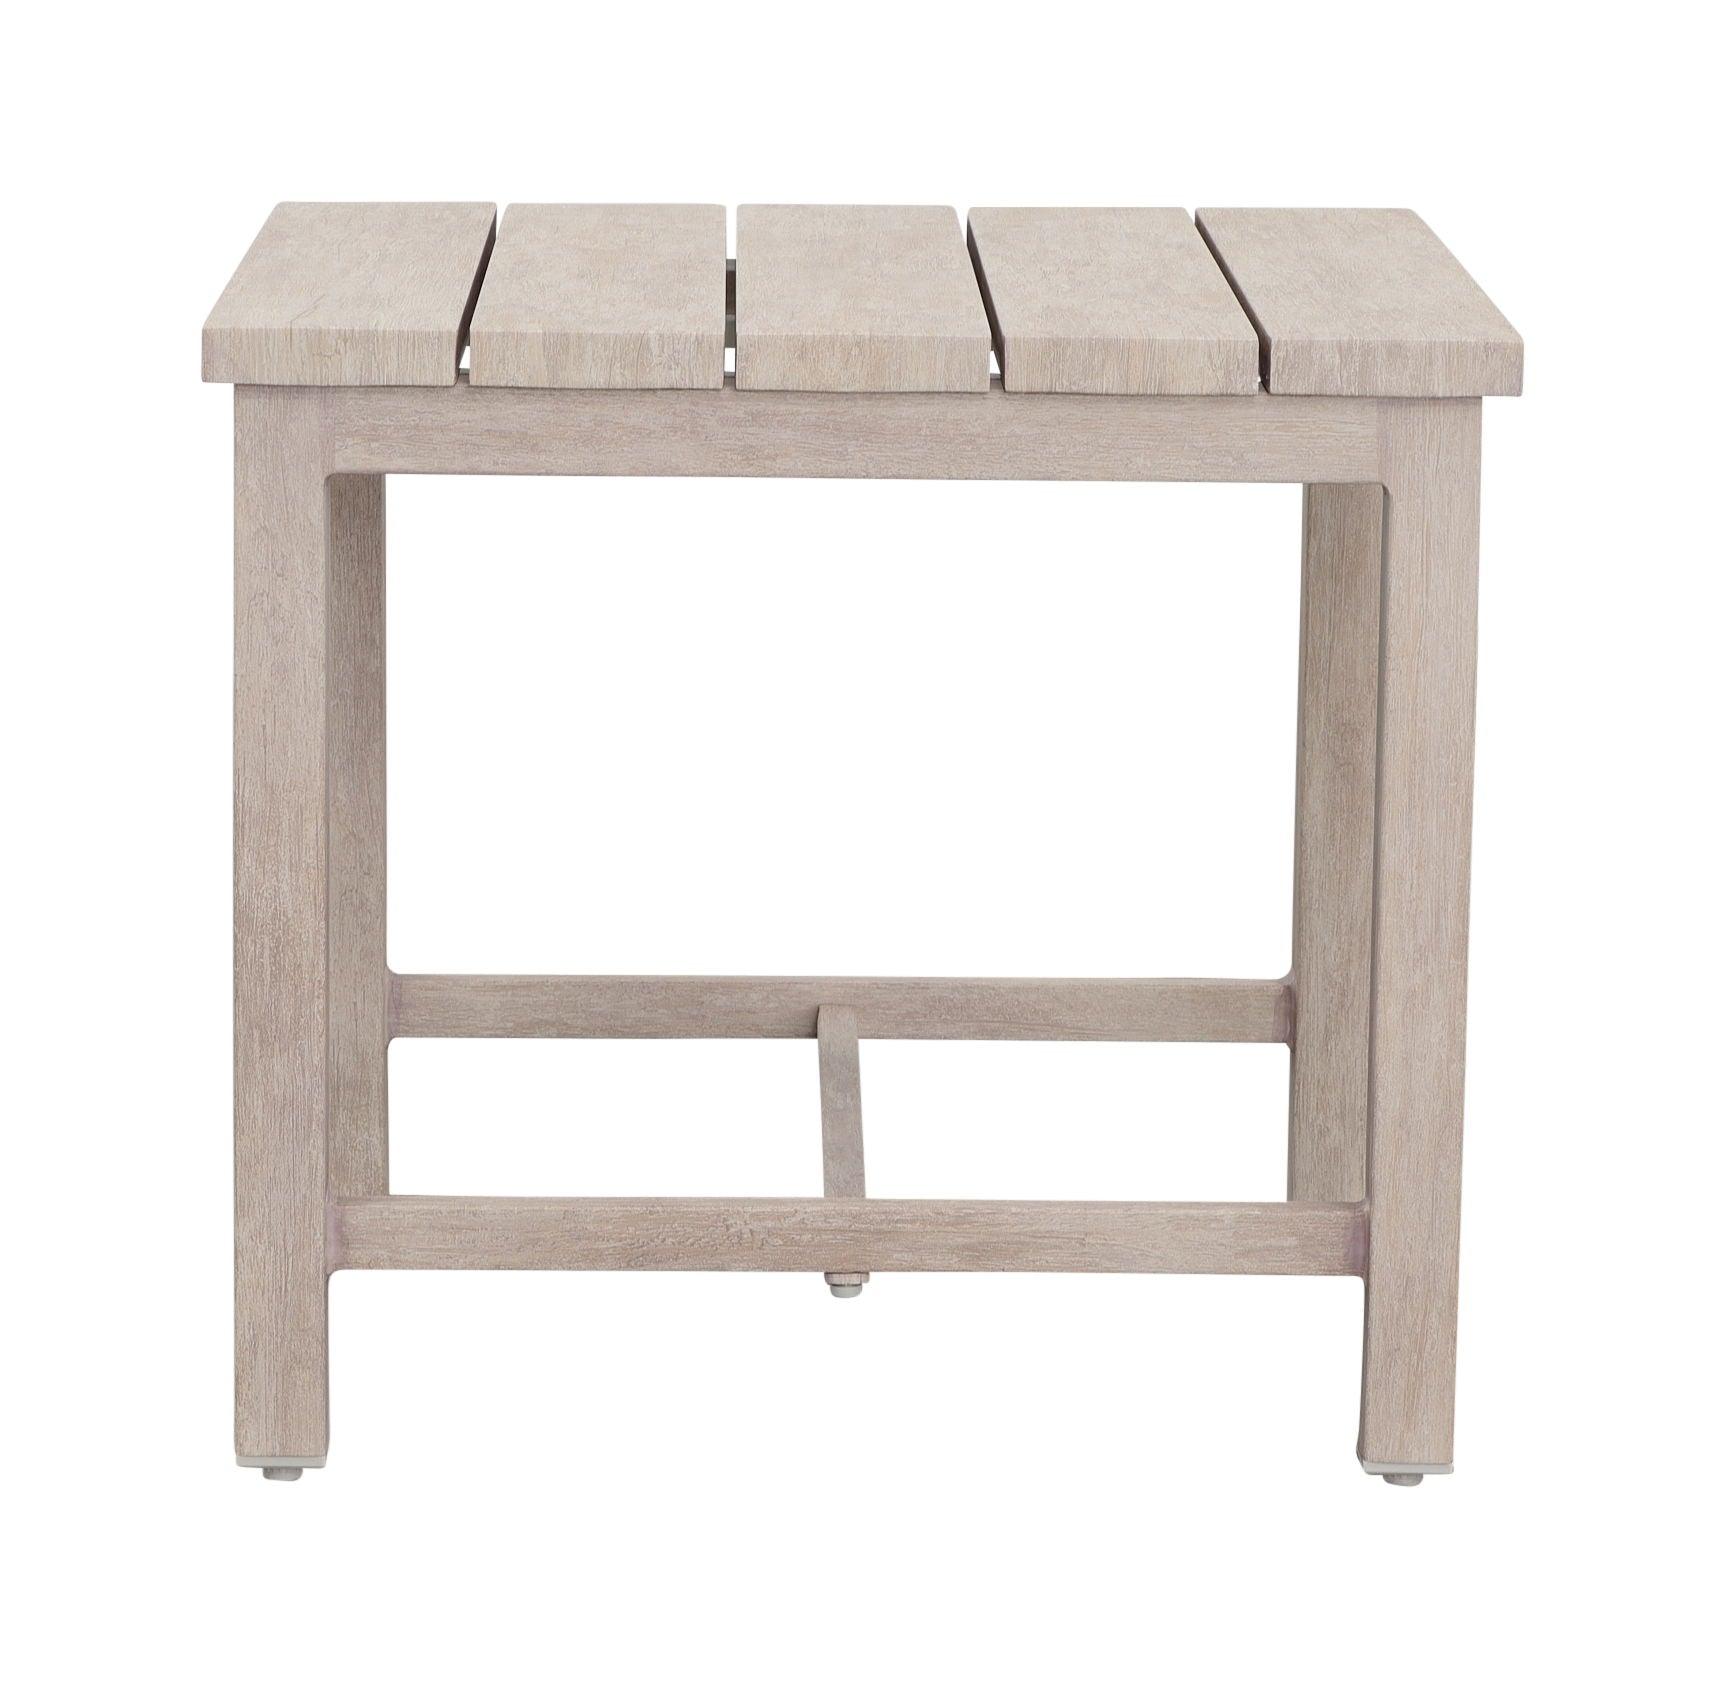 Steve Silver Furniture - Blakely - Outdoor Aluminum End Table - White - 5th Avenue Furniture